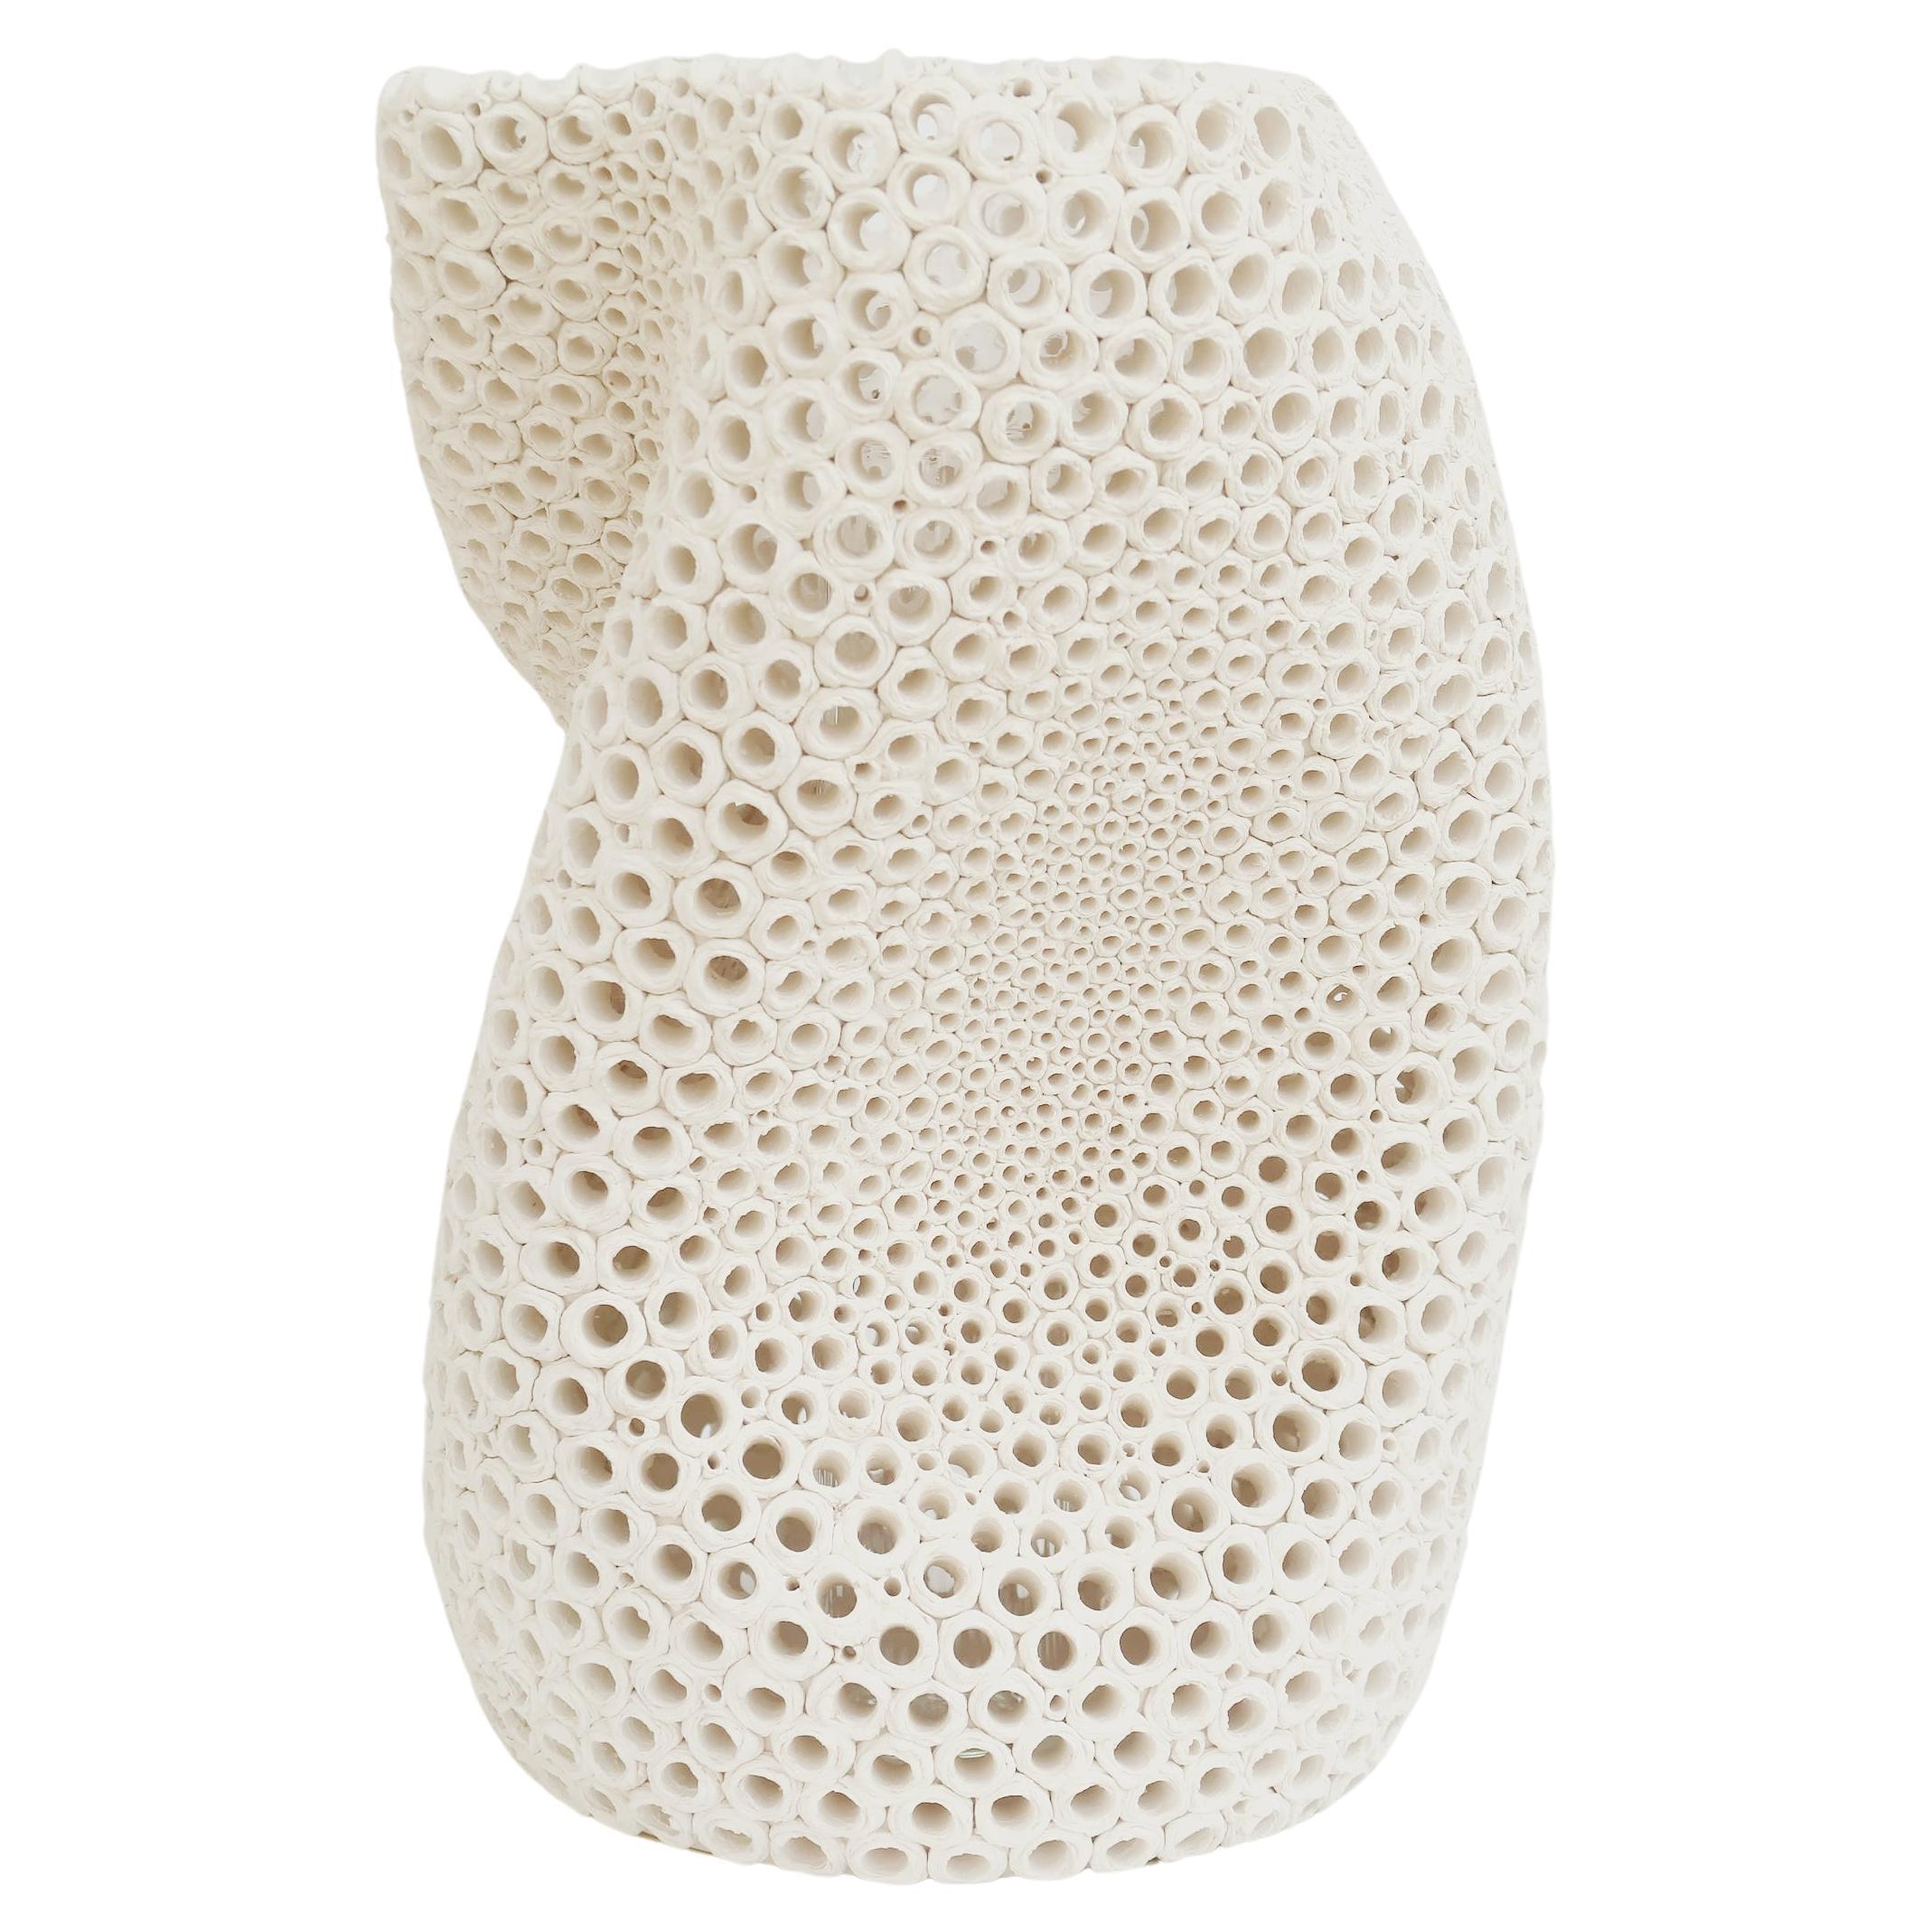 Undulating Hand-Pierced Limited Edition Earthenware Vase by Gilles Caffier For Sale